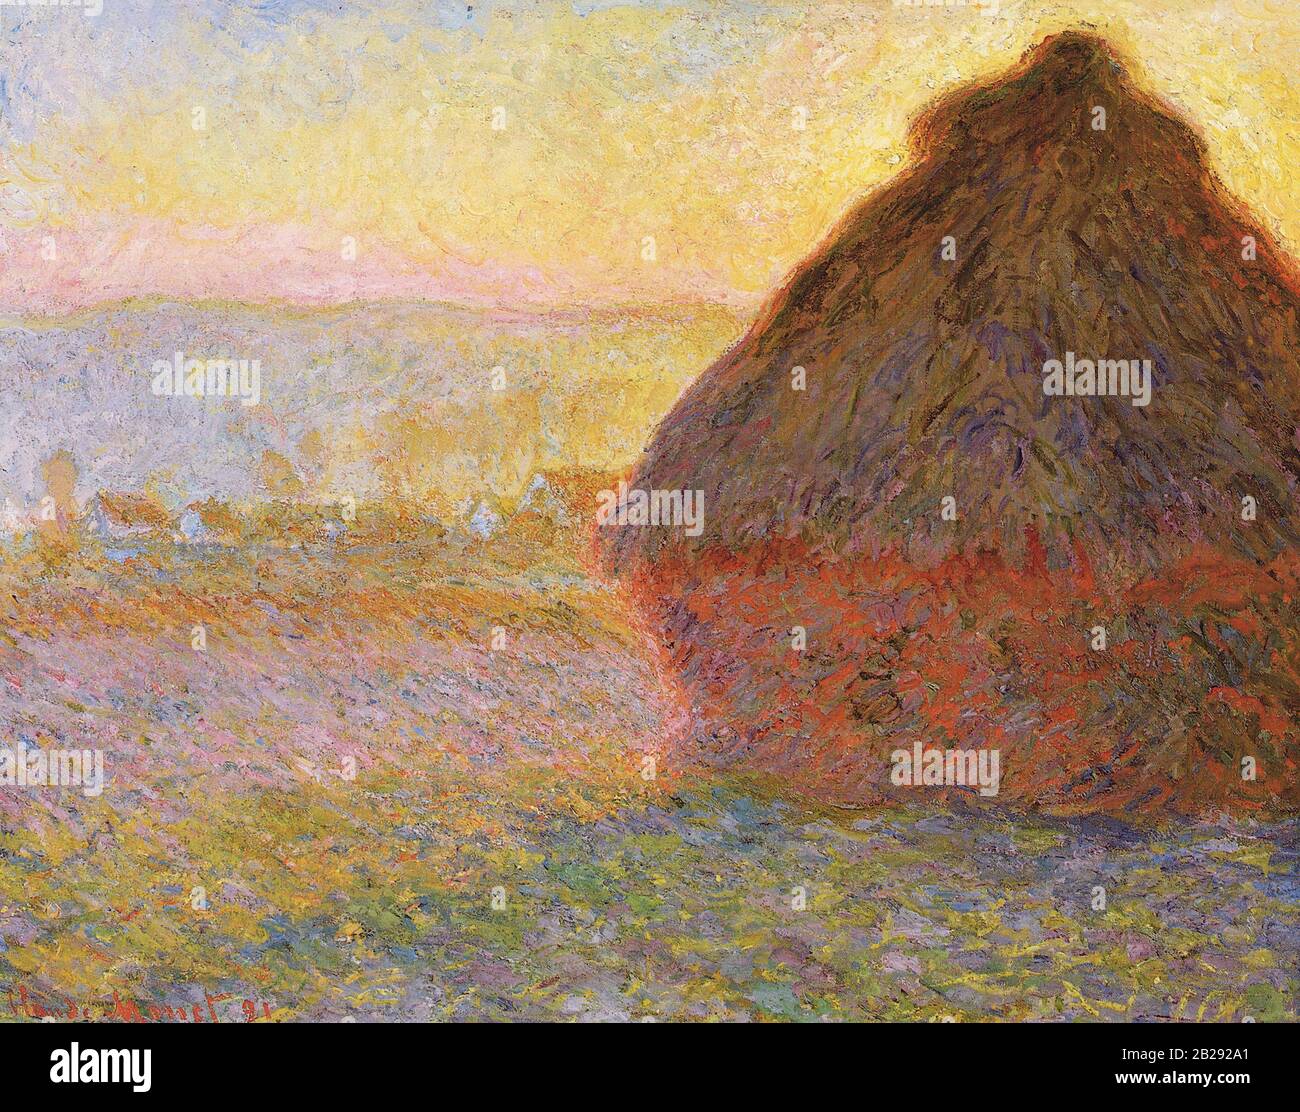 Grainstacks (Sunset), or, Haystacks (Sunset) (1891) Painting by Claude Monet - Very high resolution and quality image Stock Photo